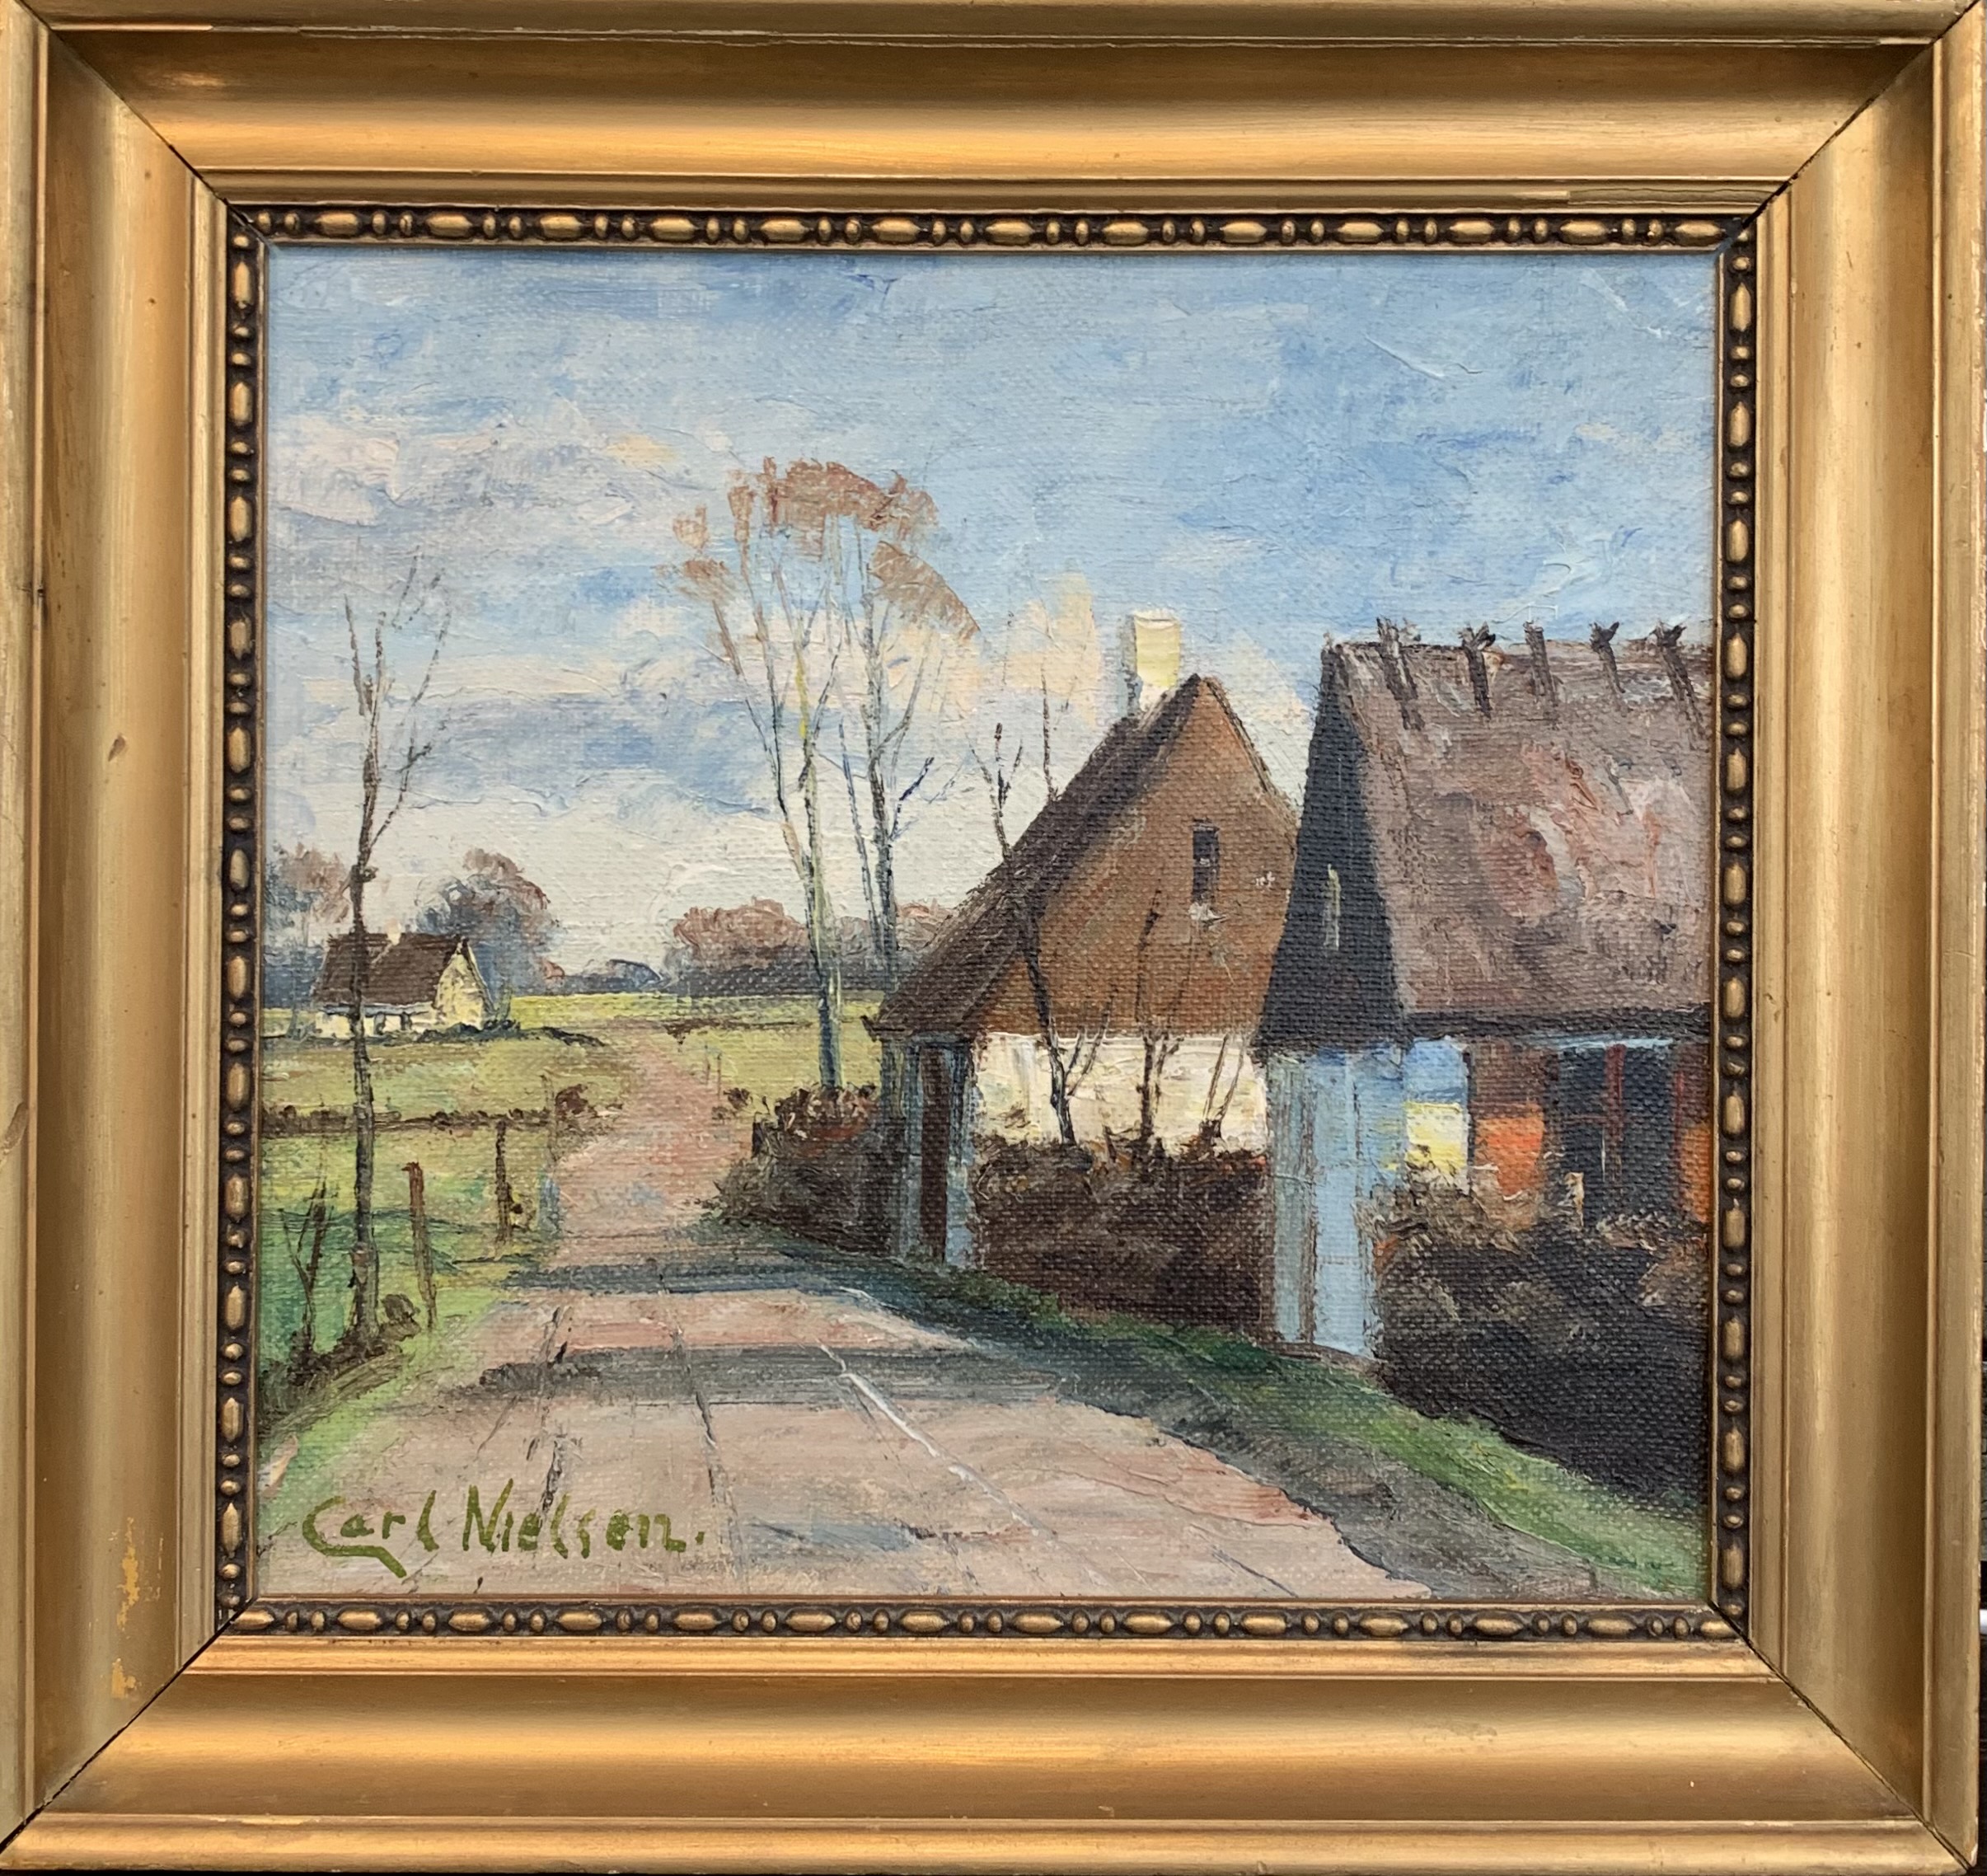 Carl Nielsen, Untitled, Oil on panel, not dated, 15.5" x 14" Value  $100